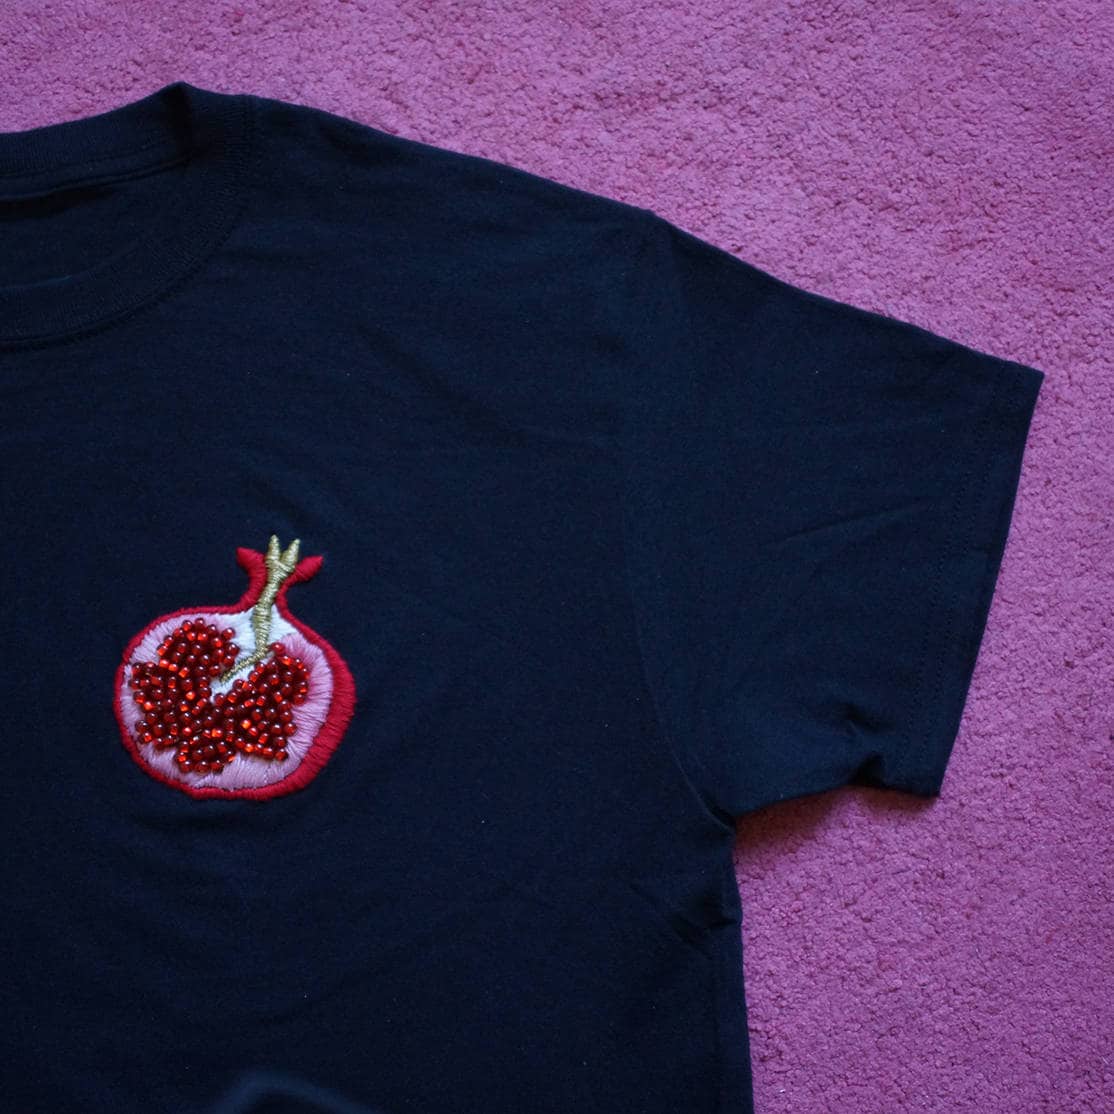 Pomegranate T-shirt hand-beaded/embroidered | Etsy